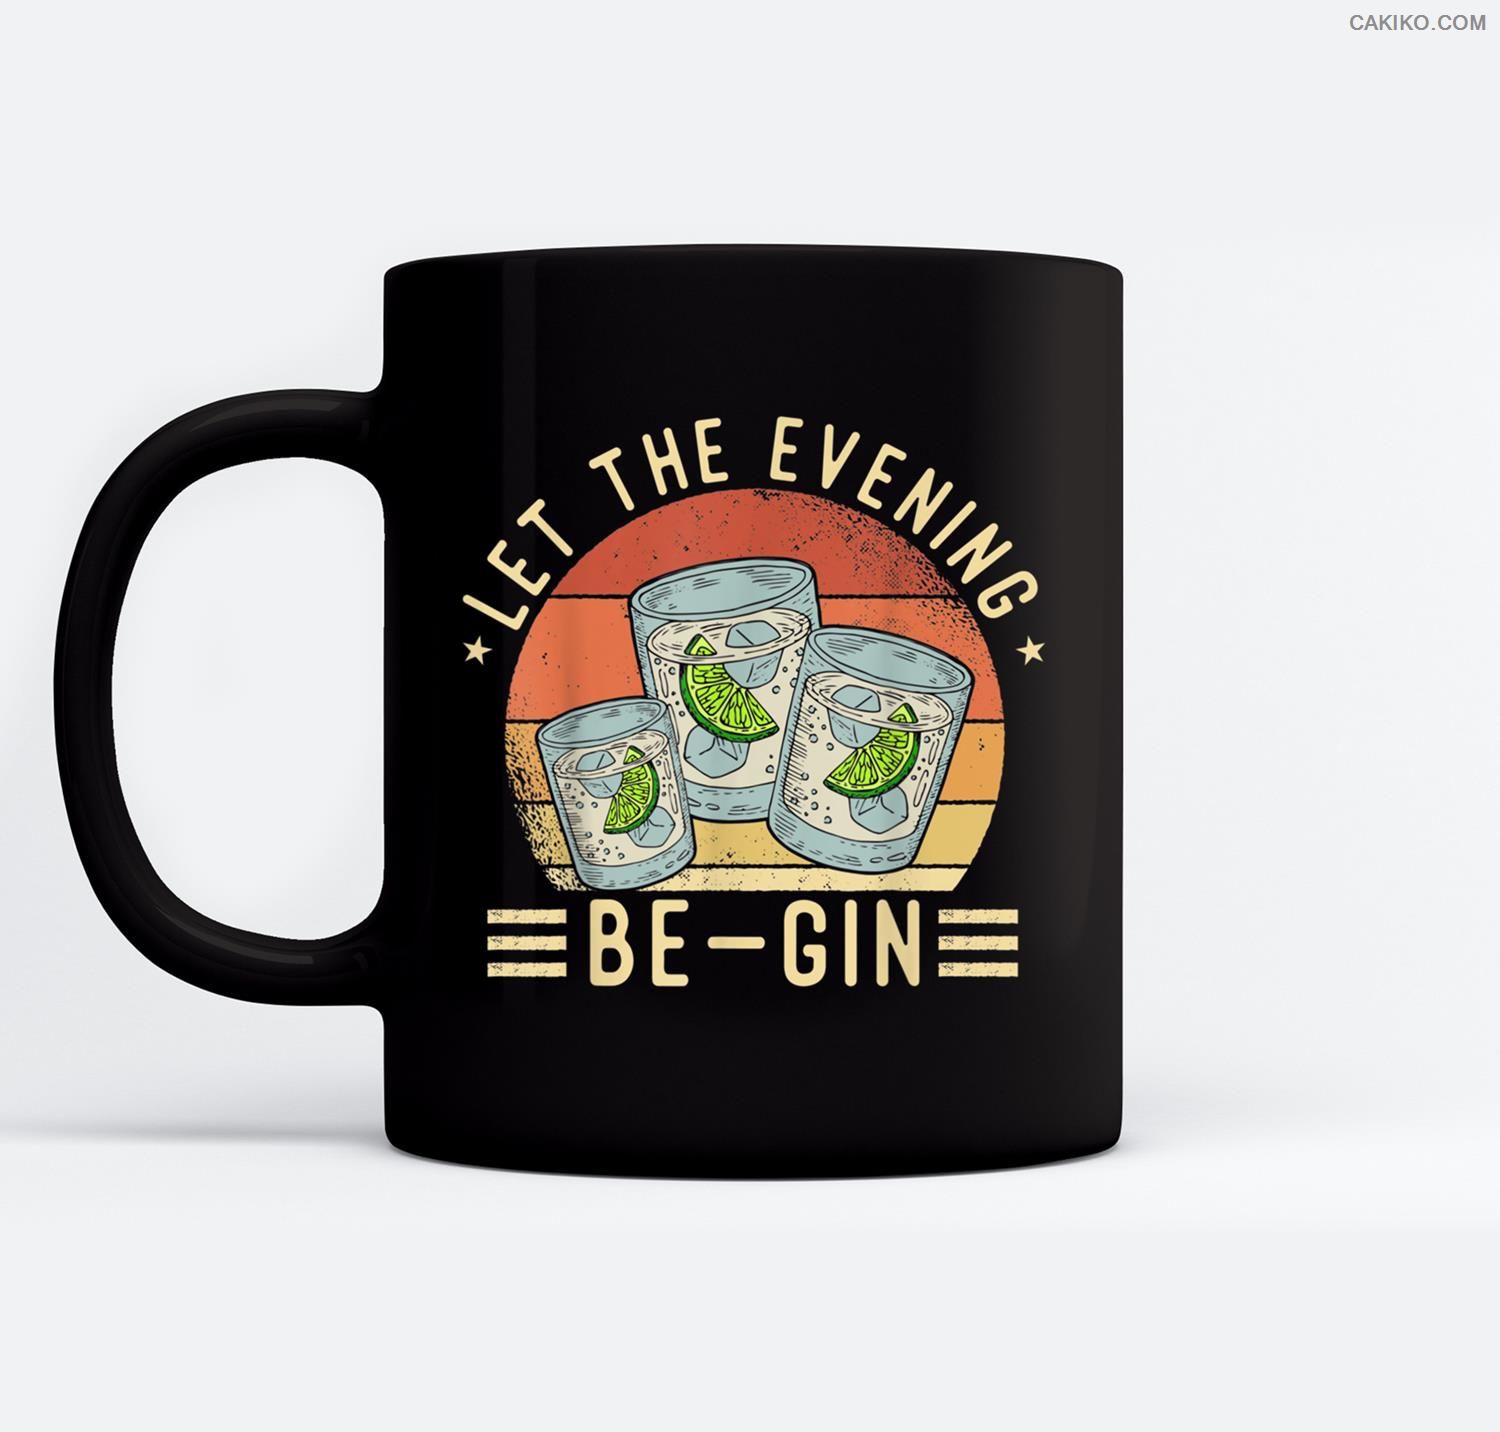 Let The Evening Be Gin , International Beer Day Ceramic Coffee Black Mugs